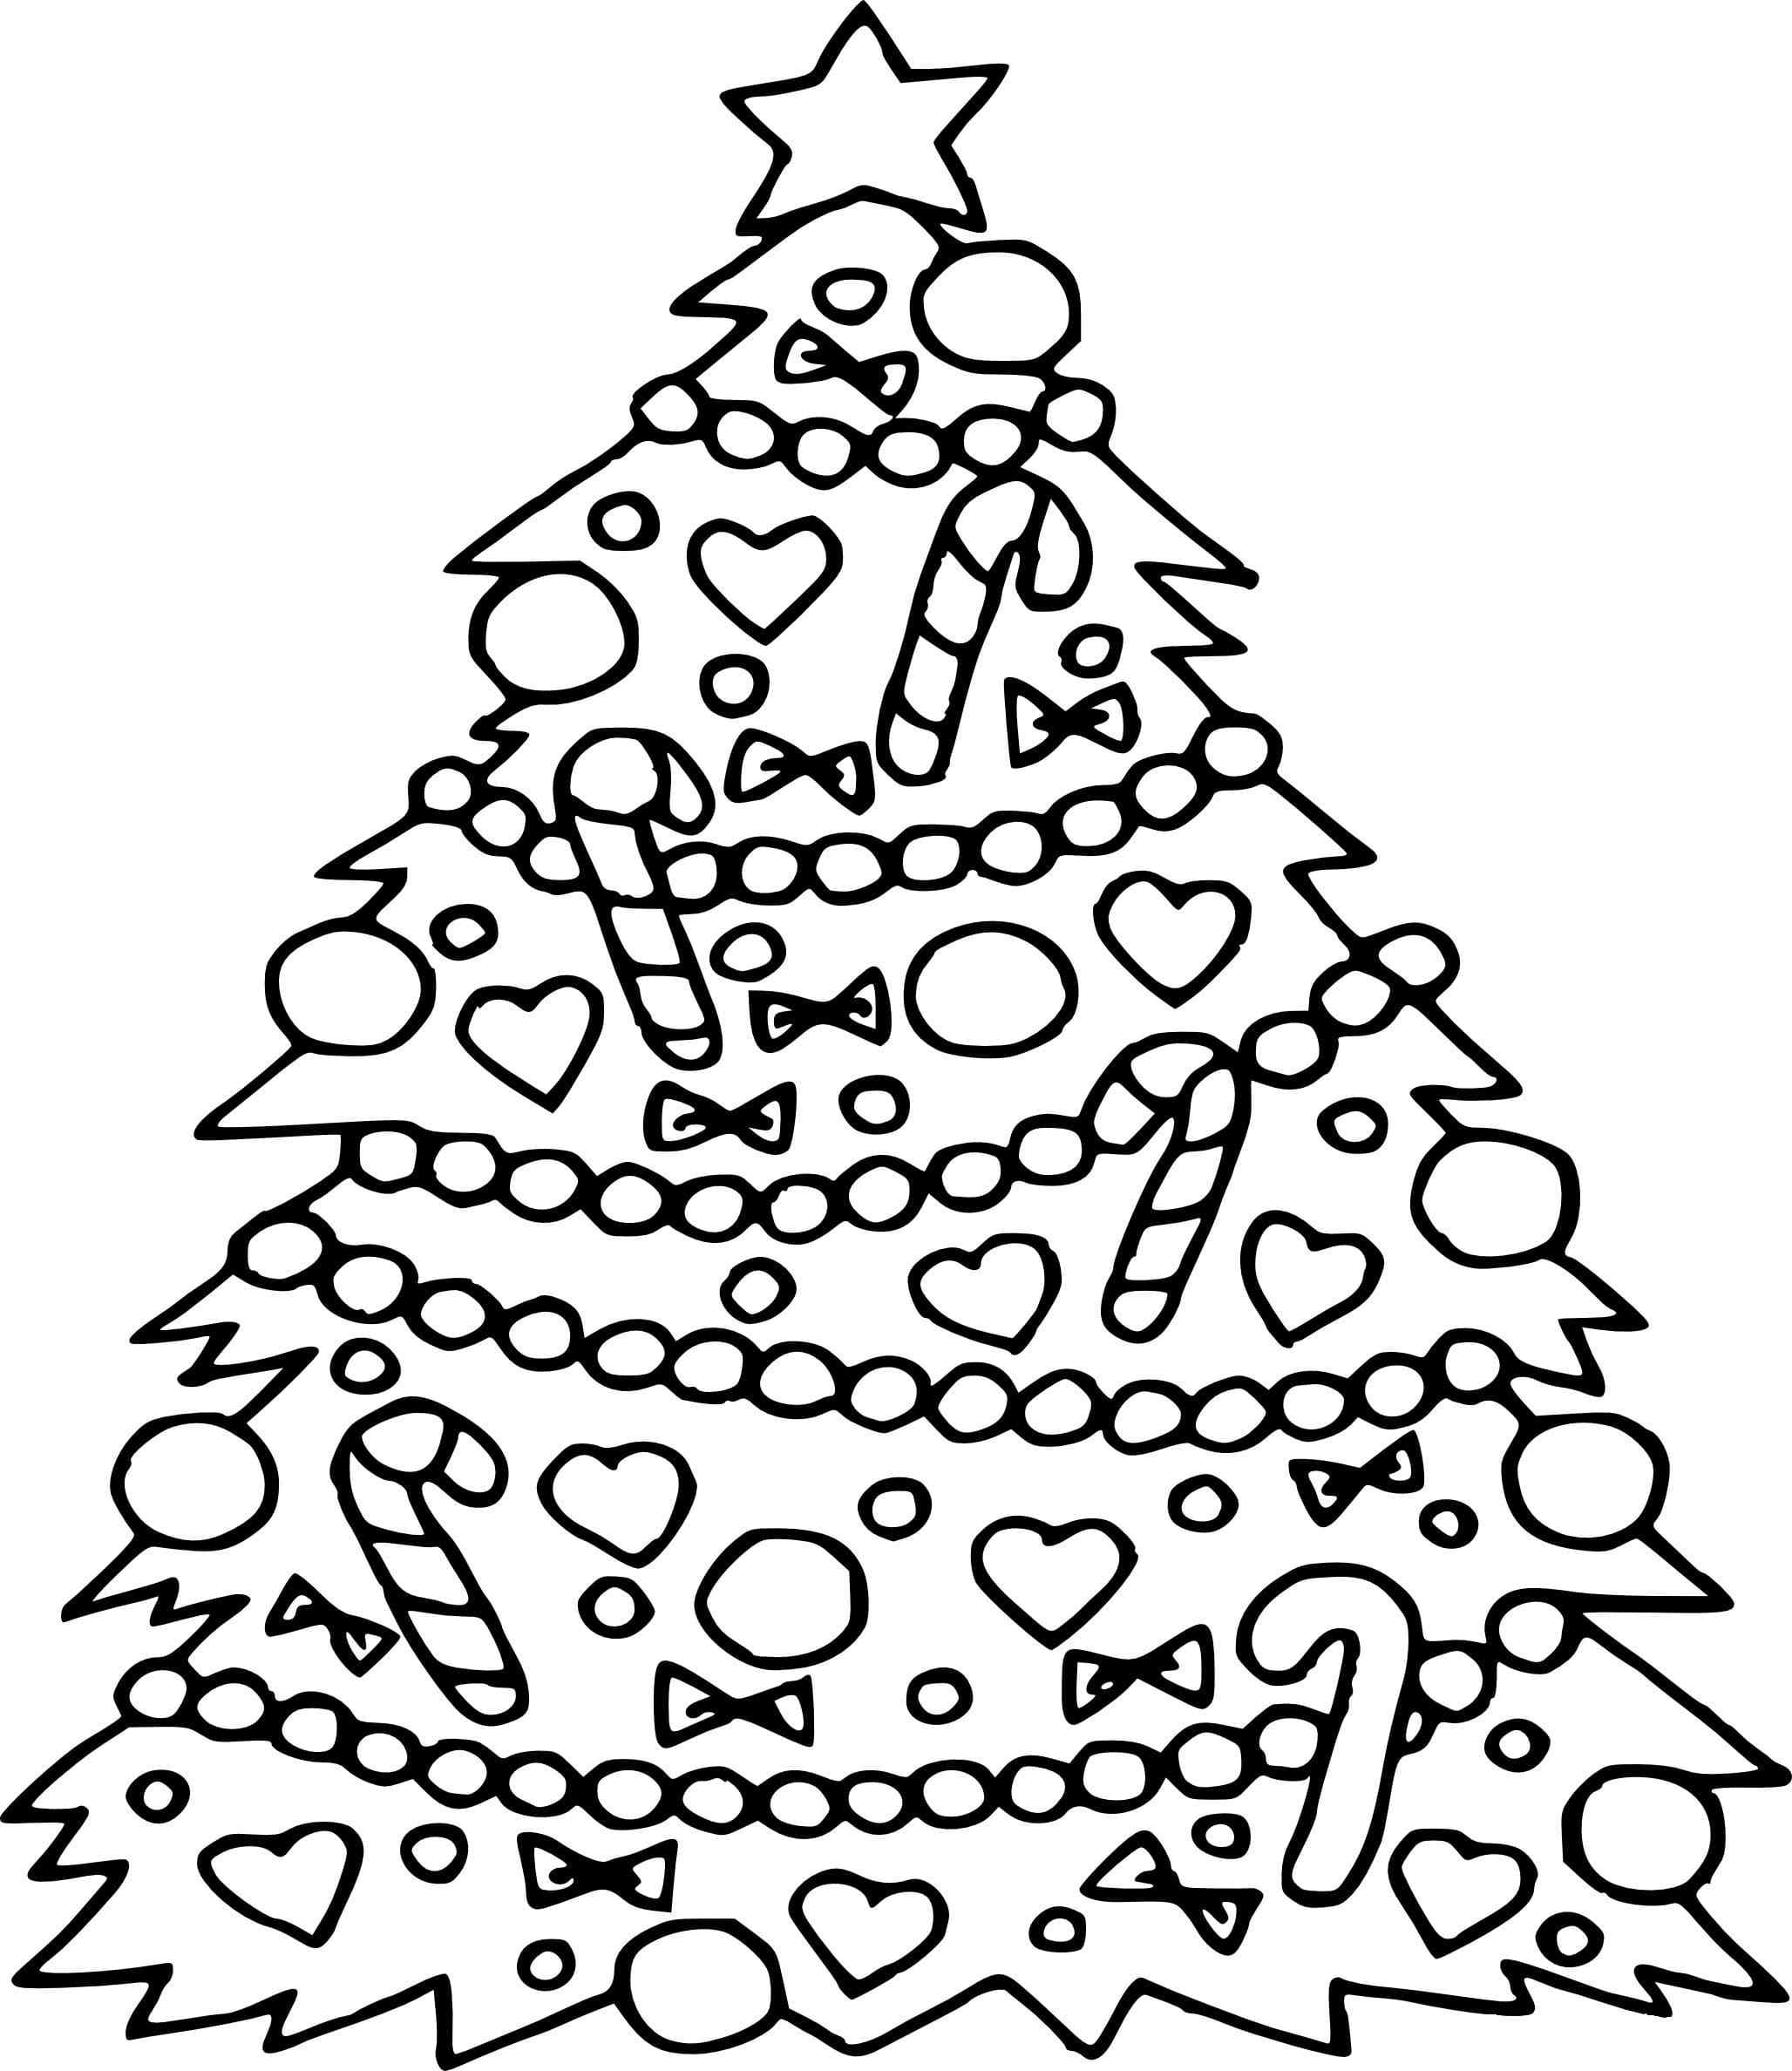 Candies, Balls And Garland Coloring Page